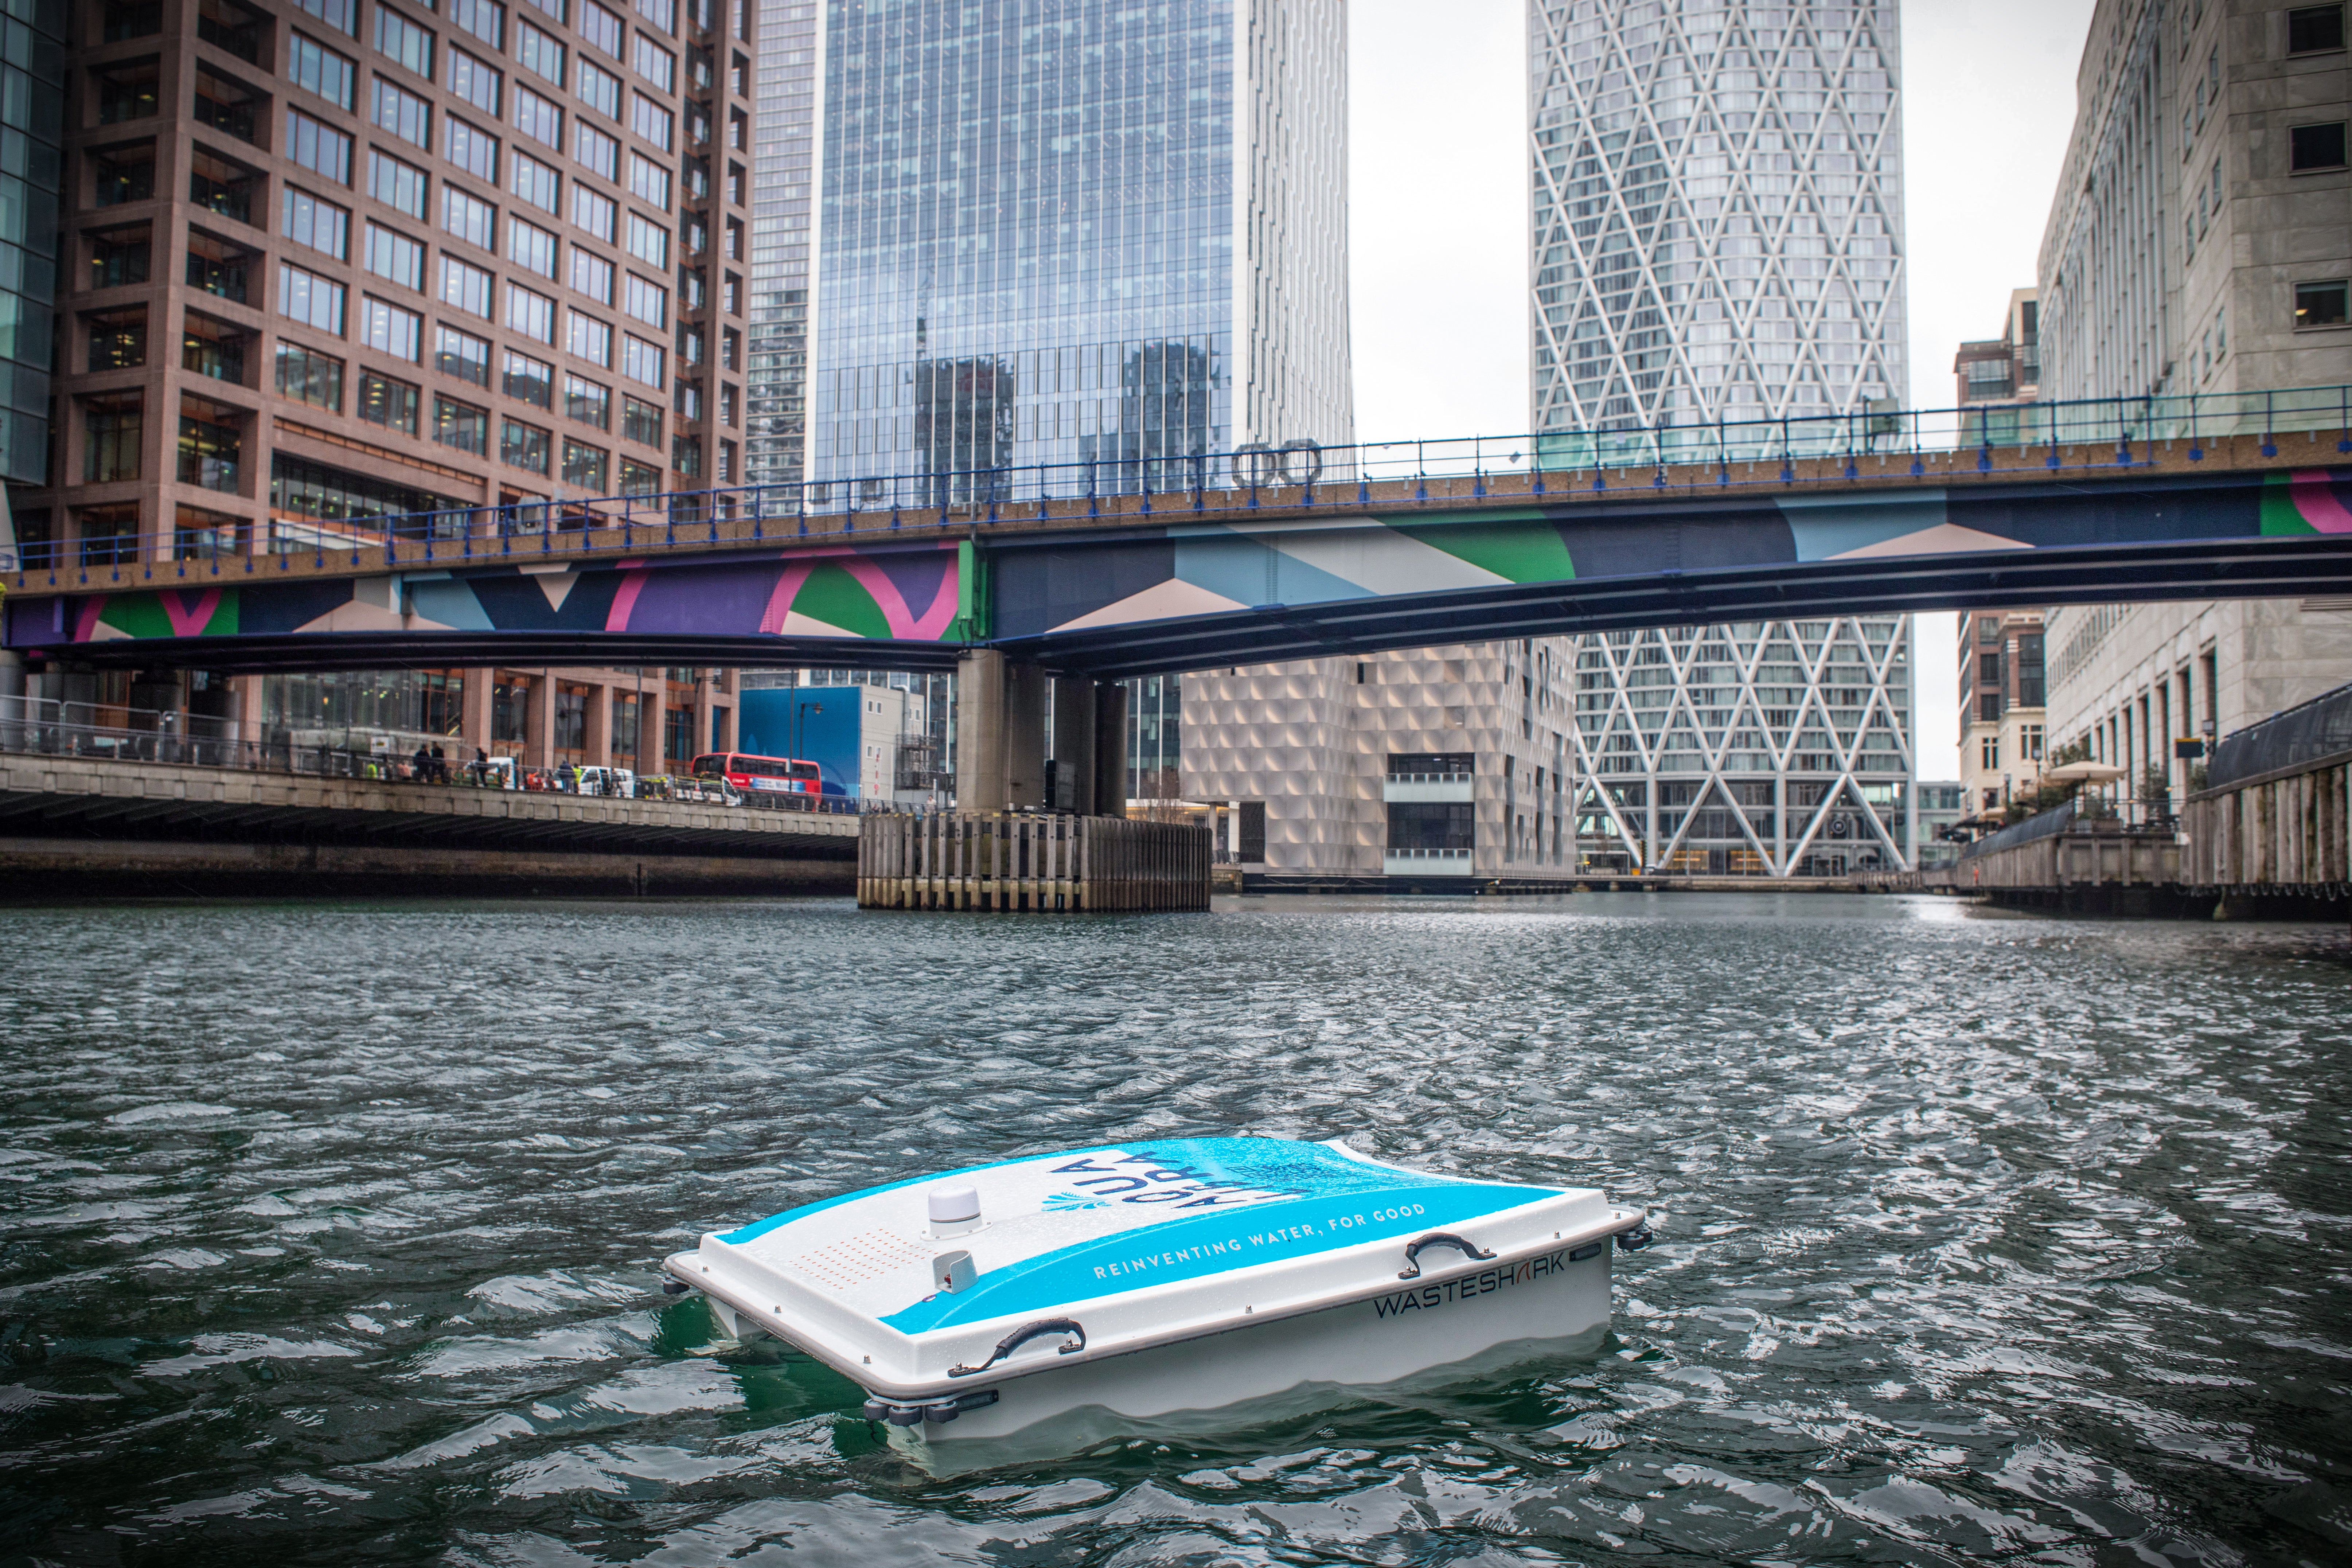 London’s first marine robot, AquaLibra WasteShark, removing plastic waste, microplastics and pollutants from the water, Canary Wharf